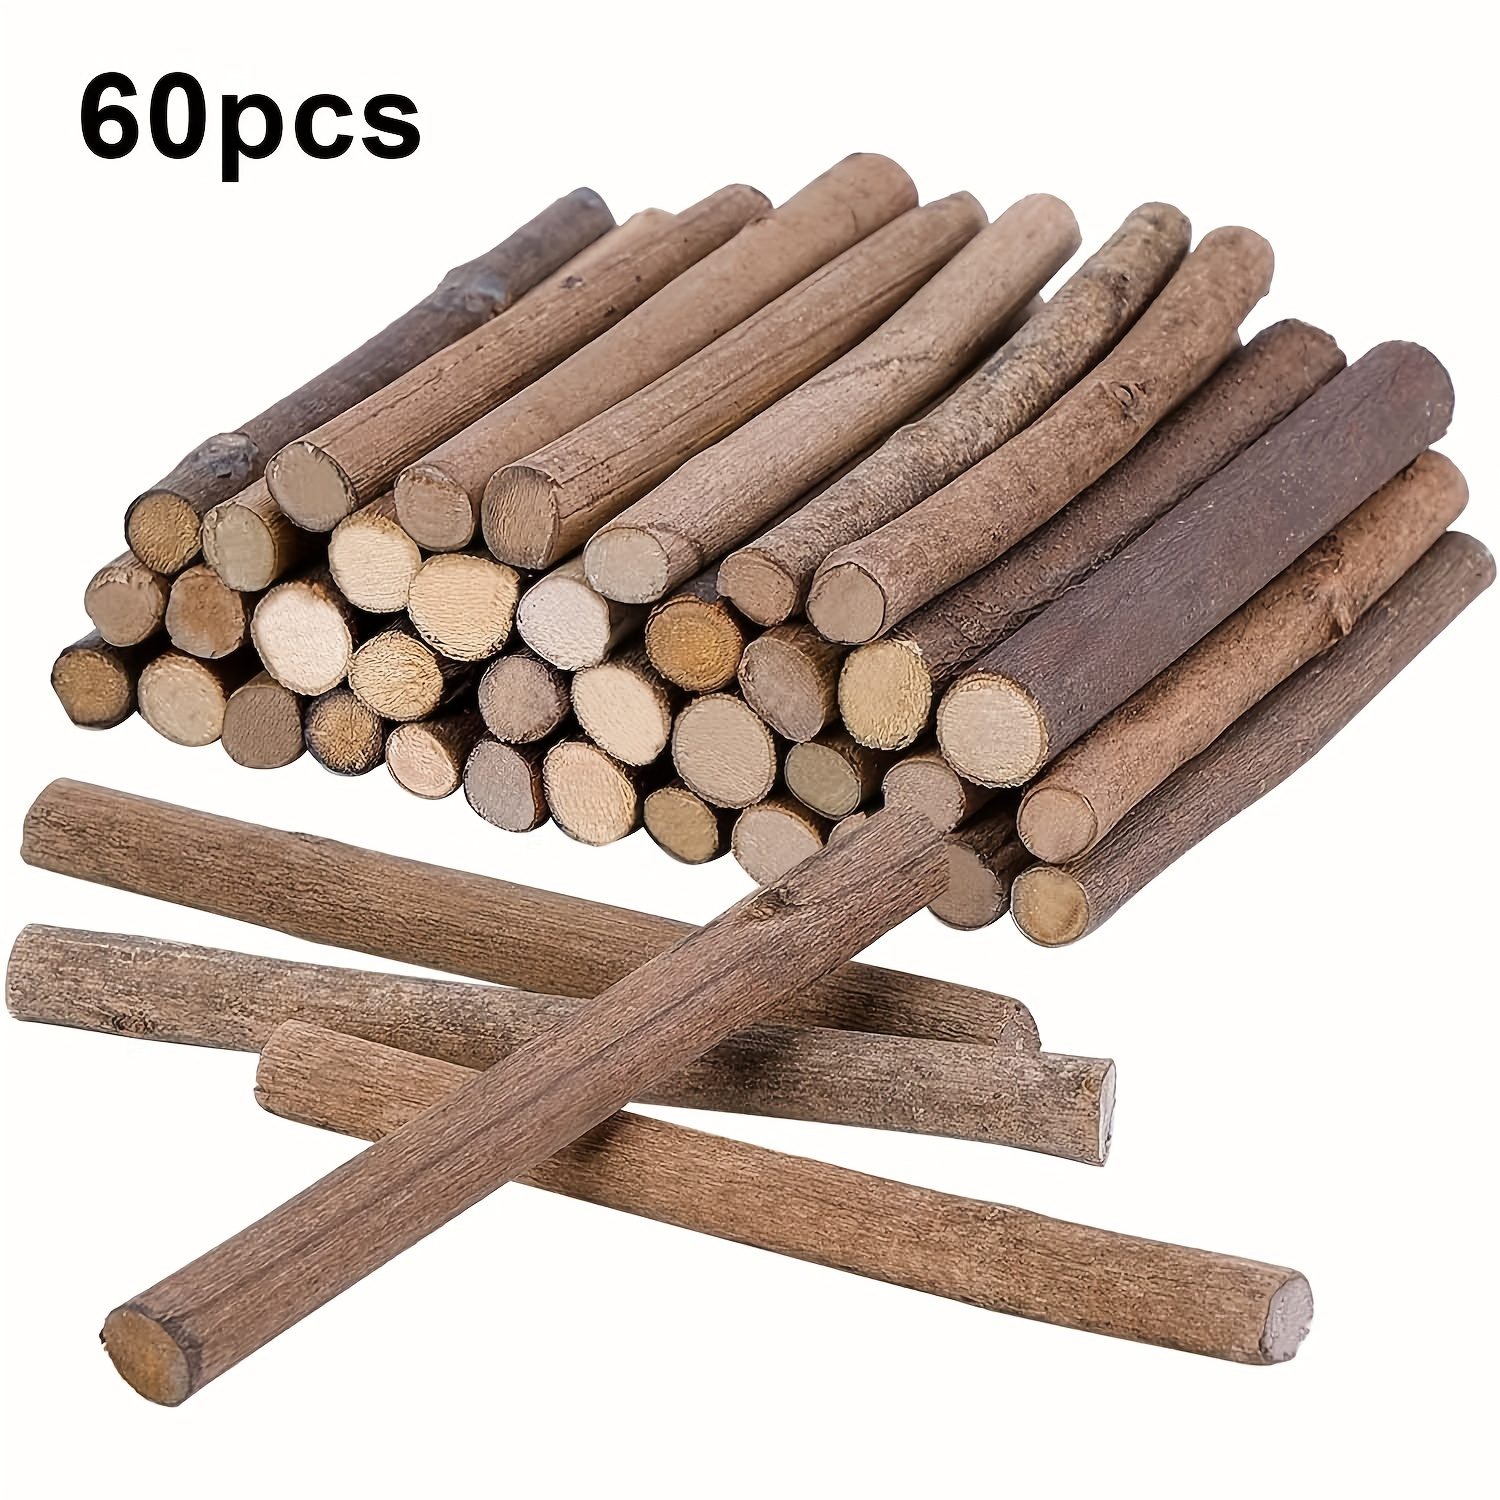 

Value Pack 60pcs 4in Long 0.3-0.5in Diameter, Wooden Log Sticks Branch Sticks Wood Crafts Sticks For Diy Crafts Photo Props, School Projects, Festival Decorations